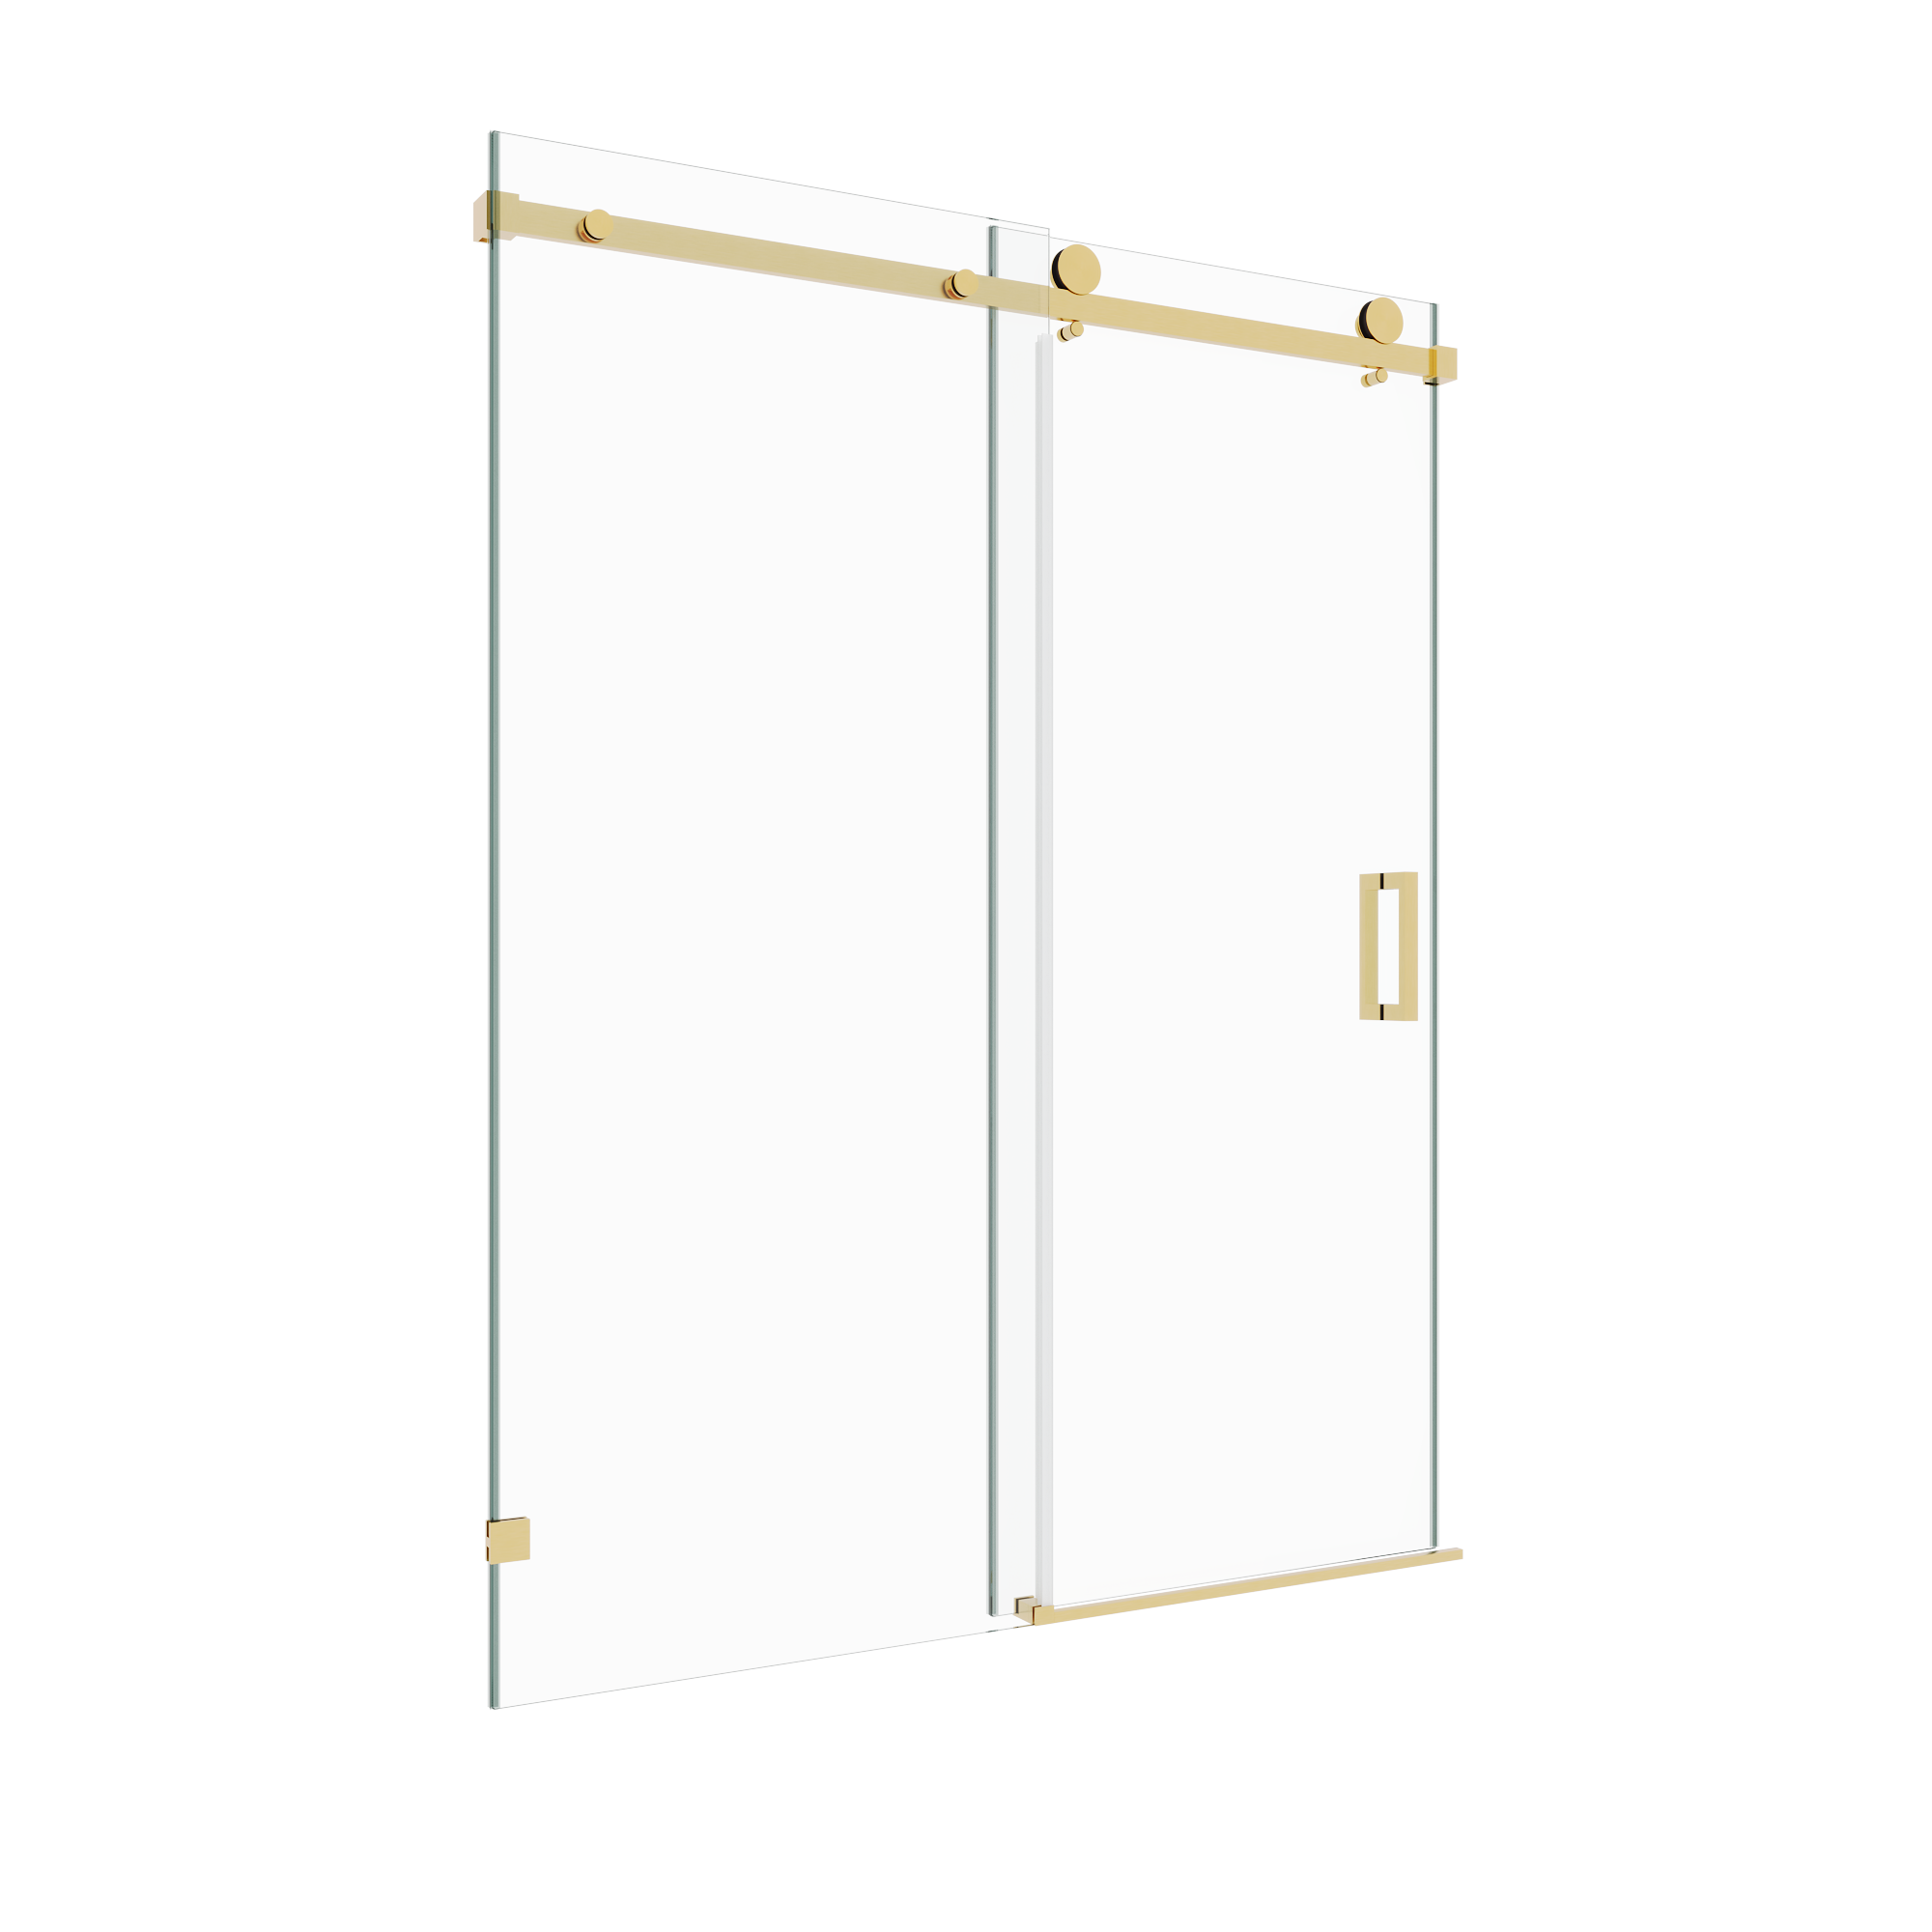 Serenity Frameless Single Sliding Shower Door with 3/8" Clear Tempered Glass